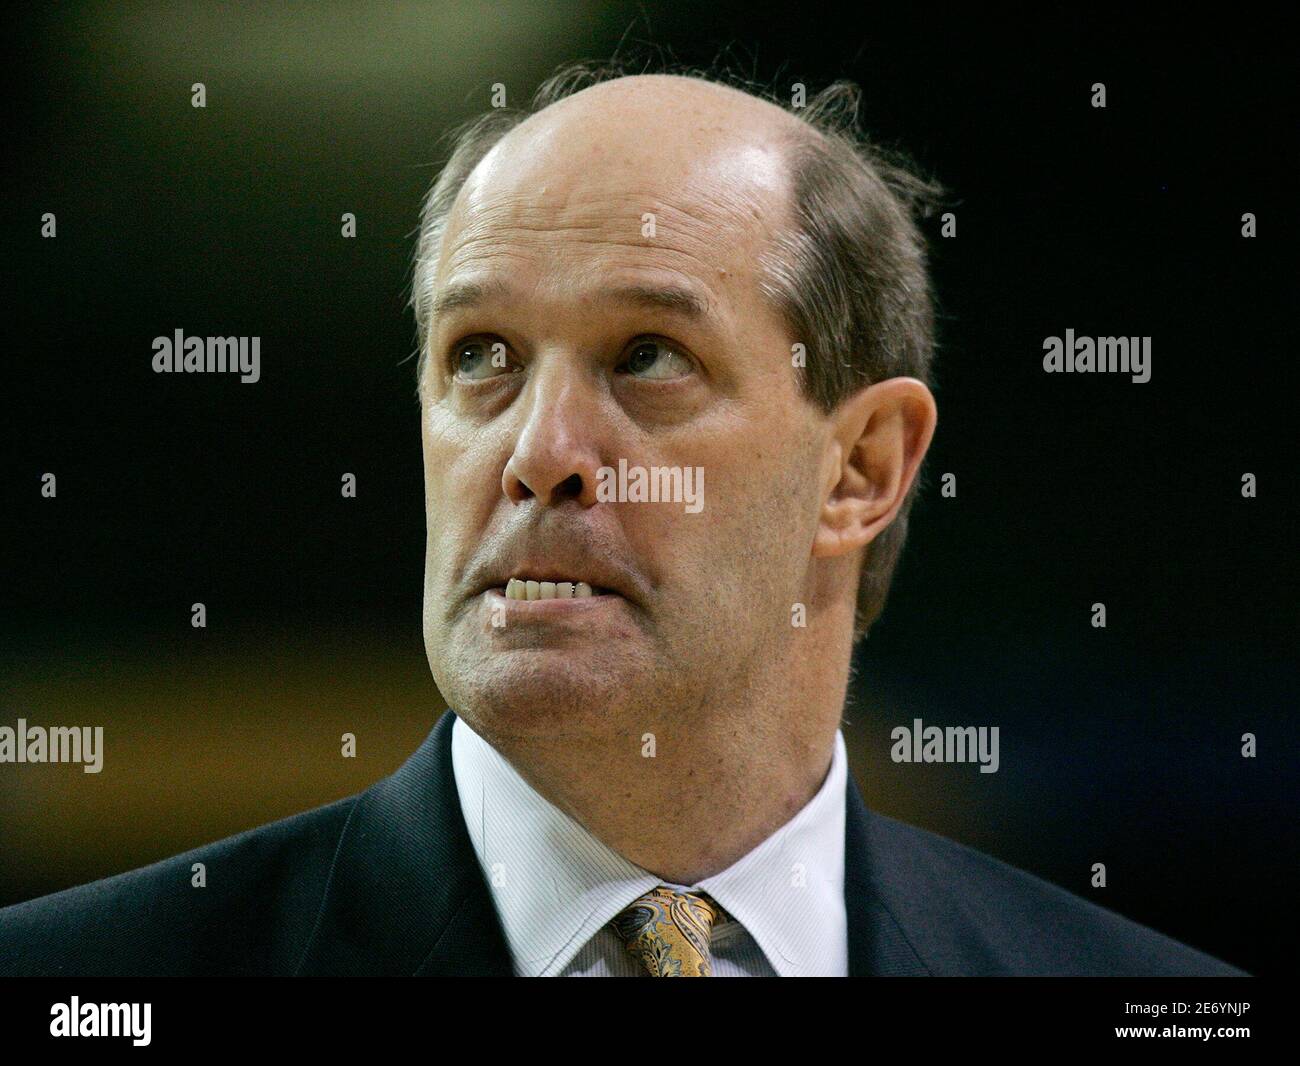 Vanderbilt University head coach Kevin Stallings reacts after their loss to Arkansas in their Southeastern Conference NCAA basketball game in Atlanta, Georgia, March 14, 2008. REUTERS/Tami Chappell (UNITED STATES) Stock Photo